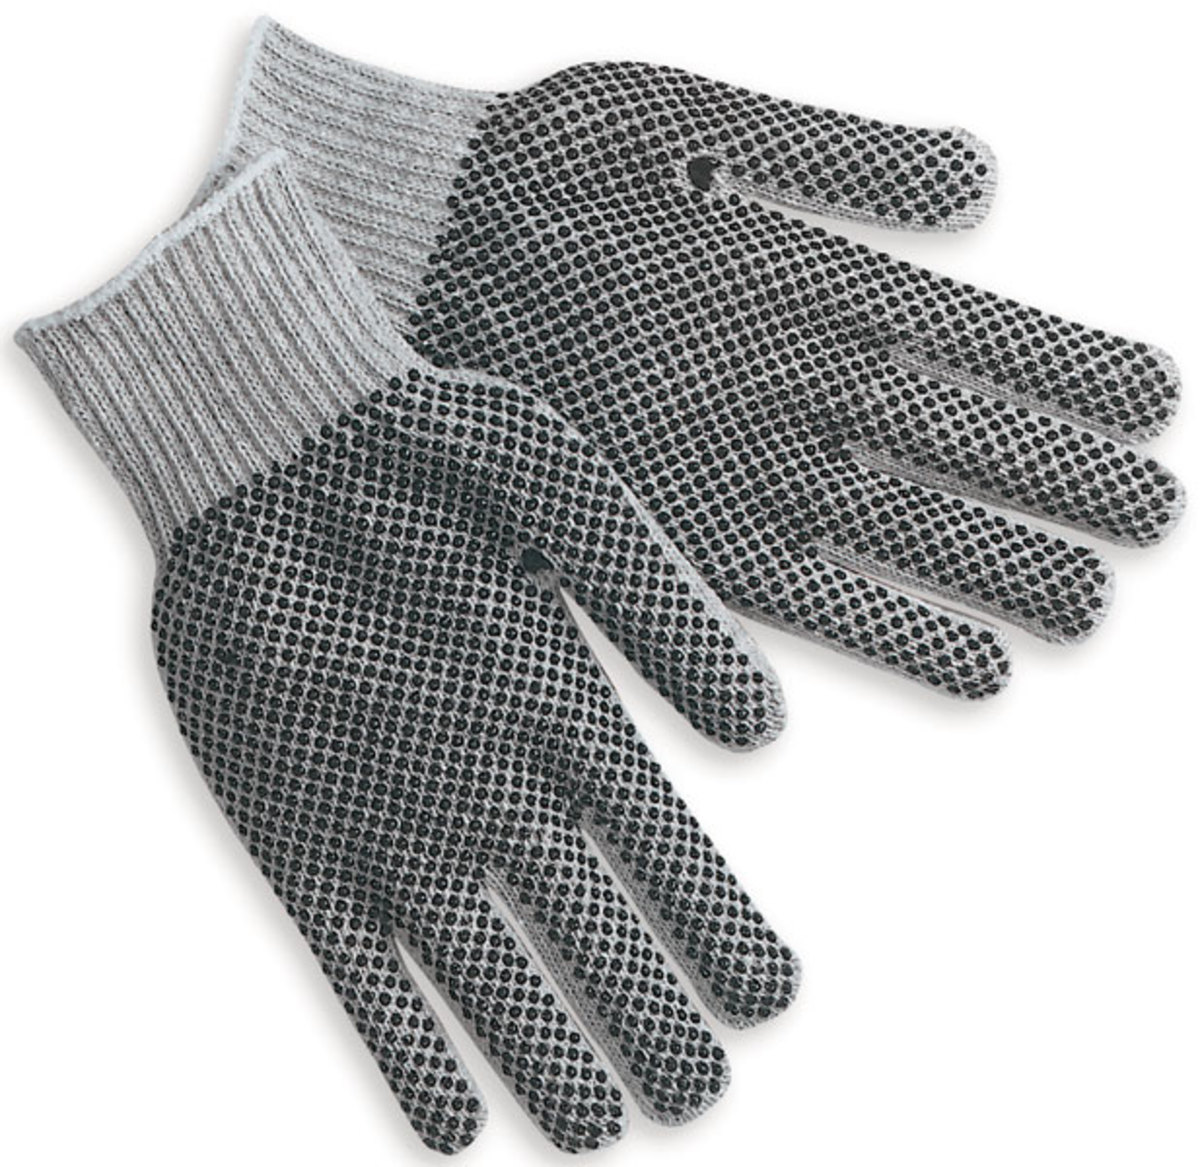 Memphis Glove Gray Large 7 Gauge Cotton And Polyester String Knit Work Gloves With Knit Wrist